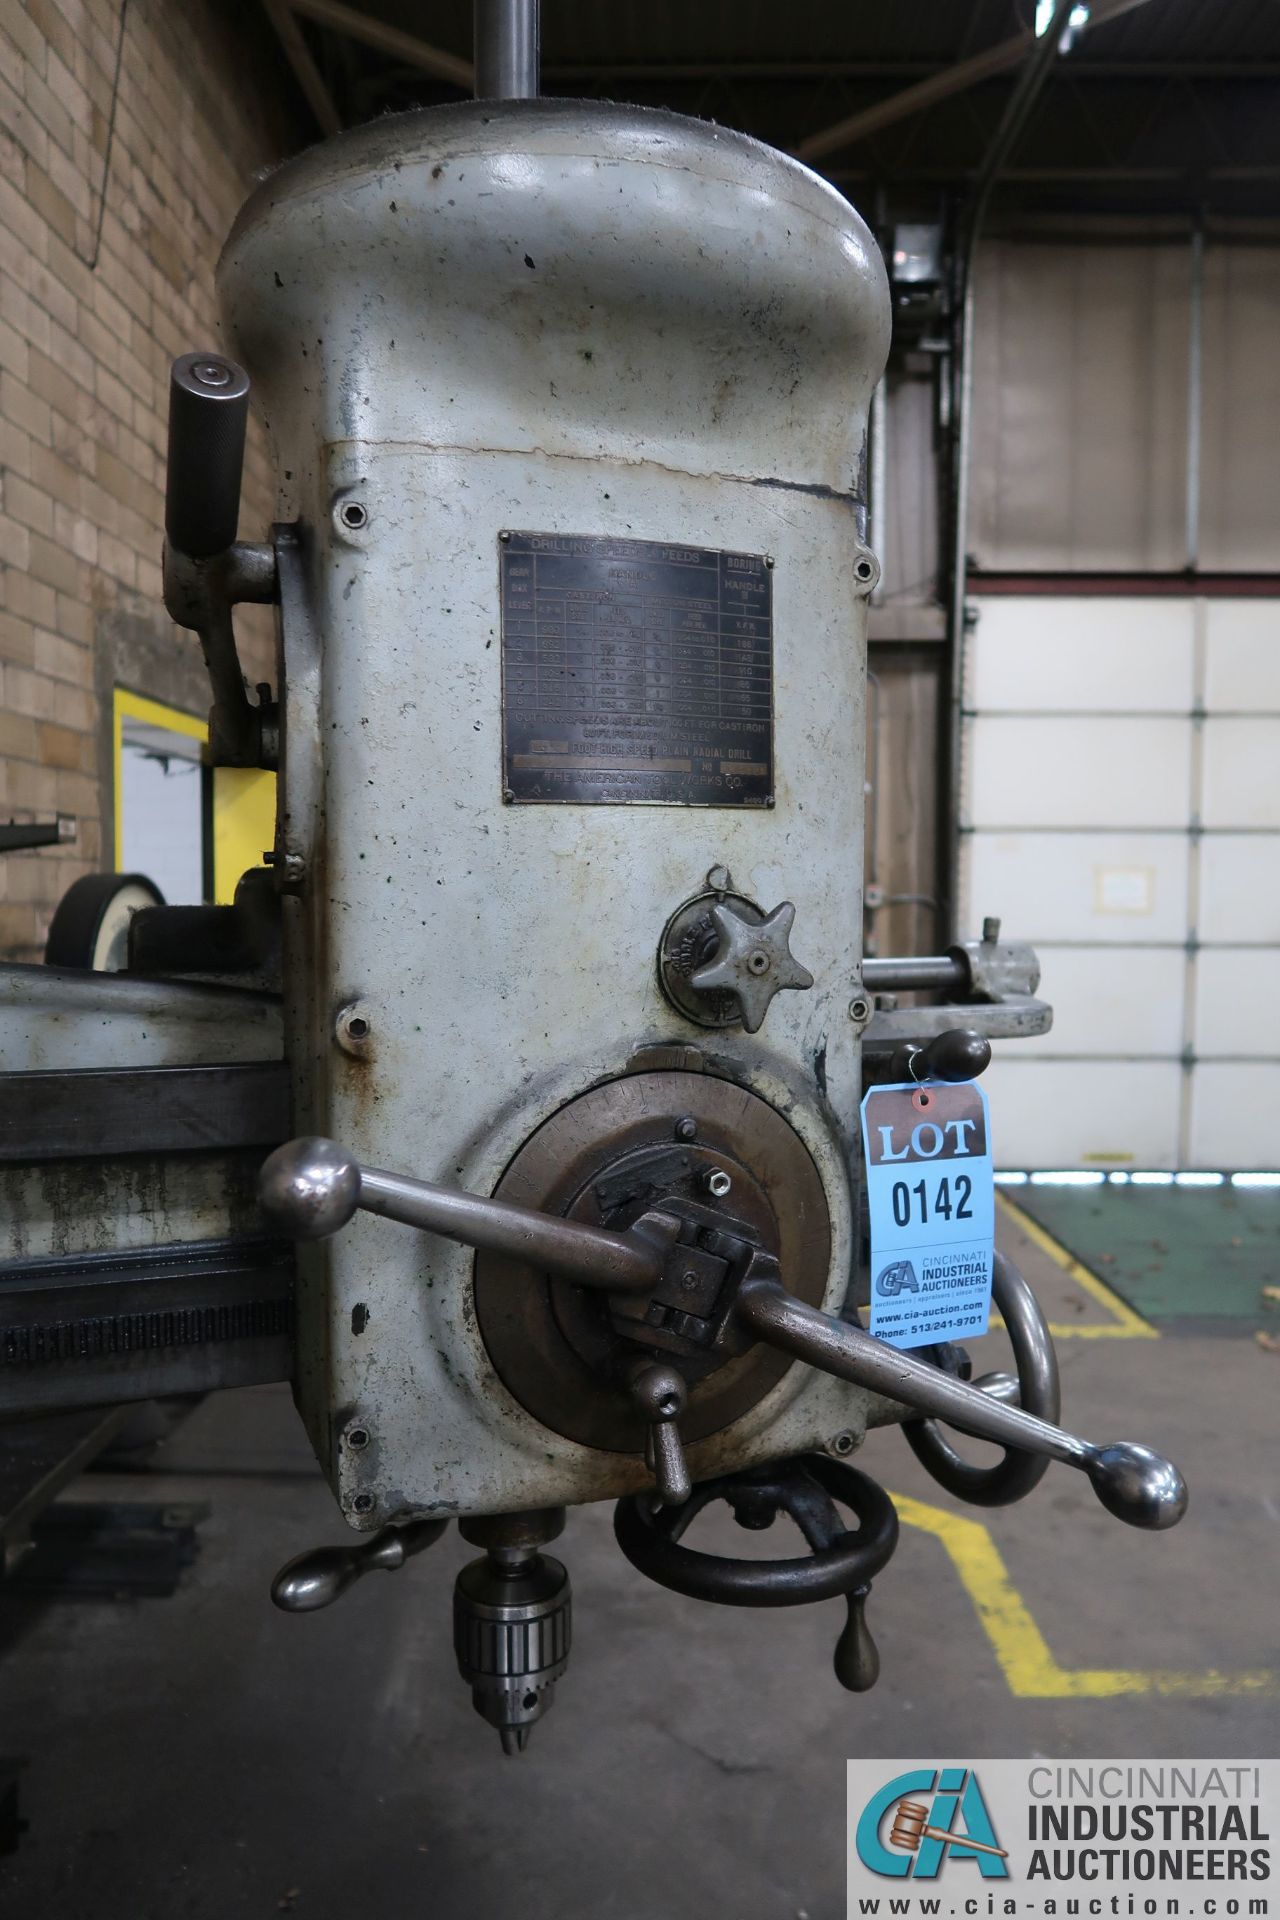 3' ARM X 7" COLUMN AMERICAN TOOL WORKS RADIAL ARM DRILL; S/N 53532, 16" X 22" X 19" T-SLOTTED - Image 5 of 10